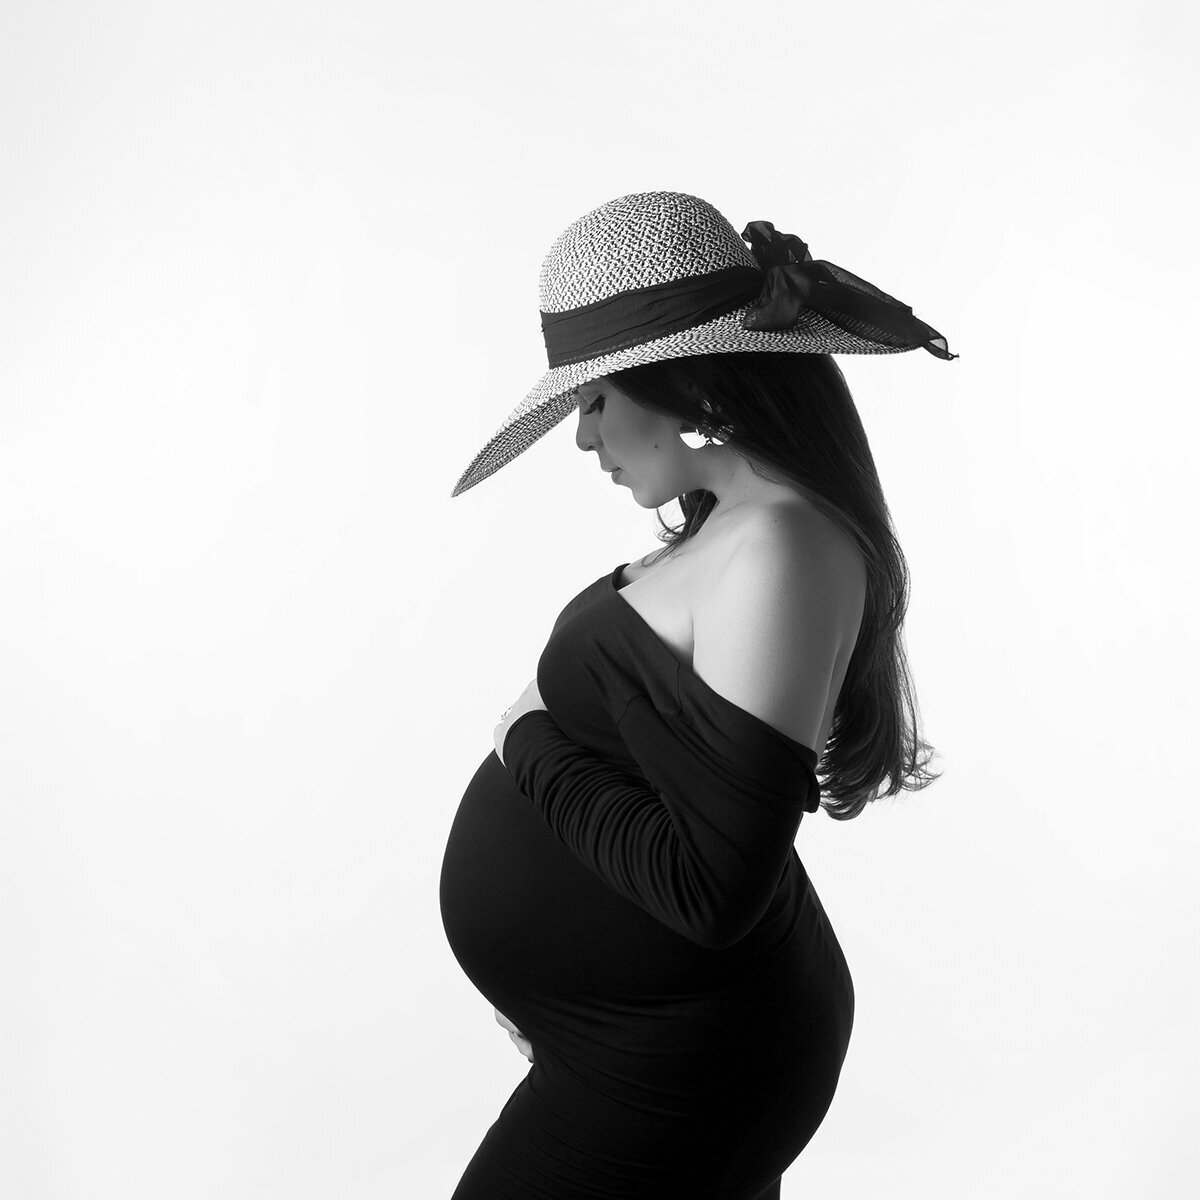 Black and white maternity photo in Charlotte, NC. A radiant Latina mom-to-be, glowing with anticipation wearing a black dress and hat, posing against a simple white background.